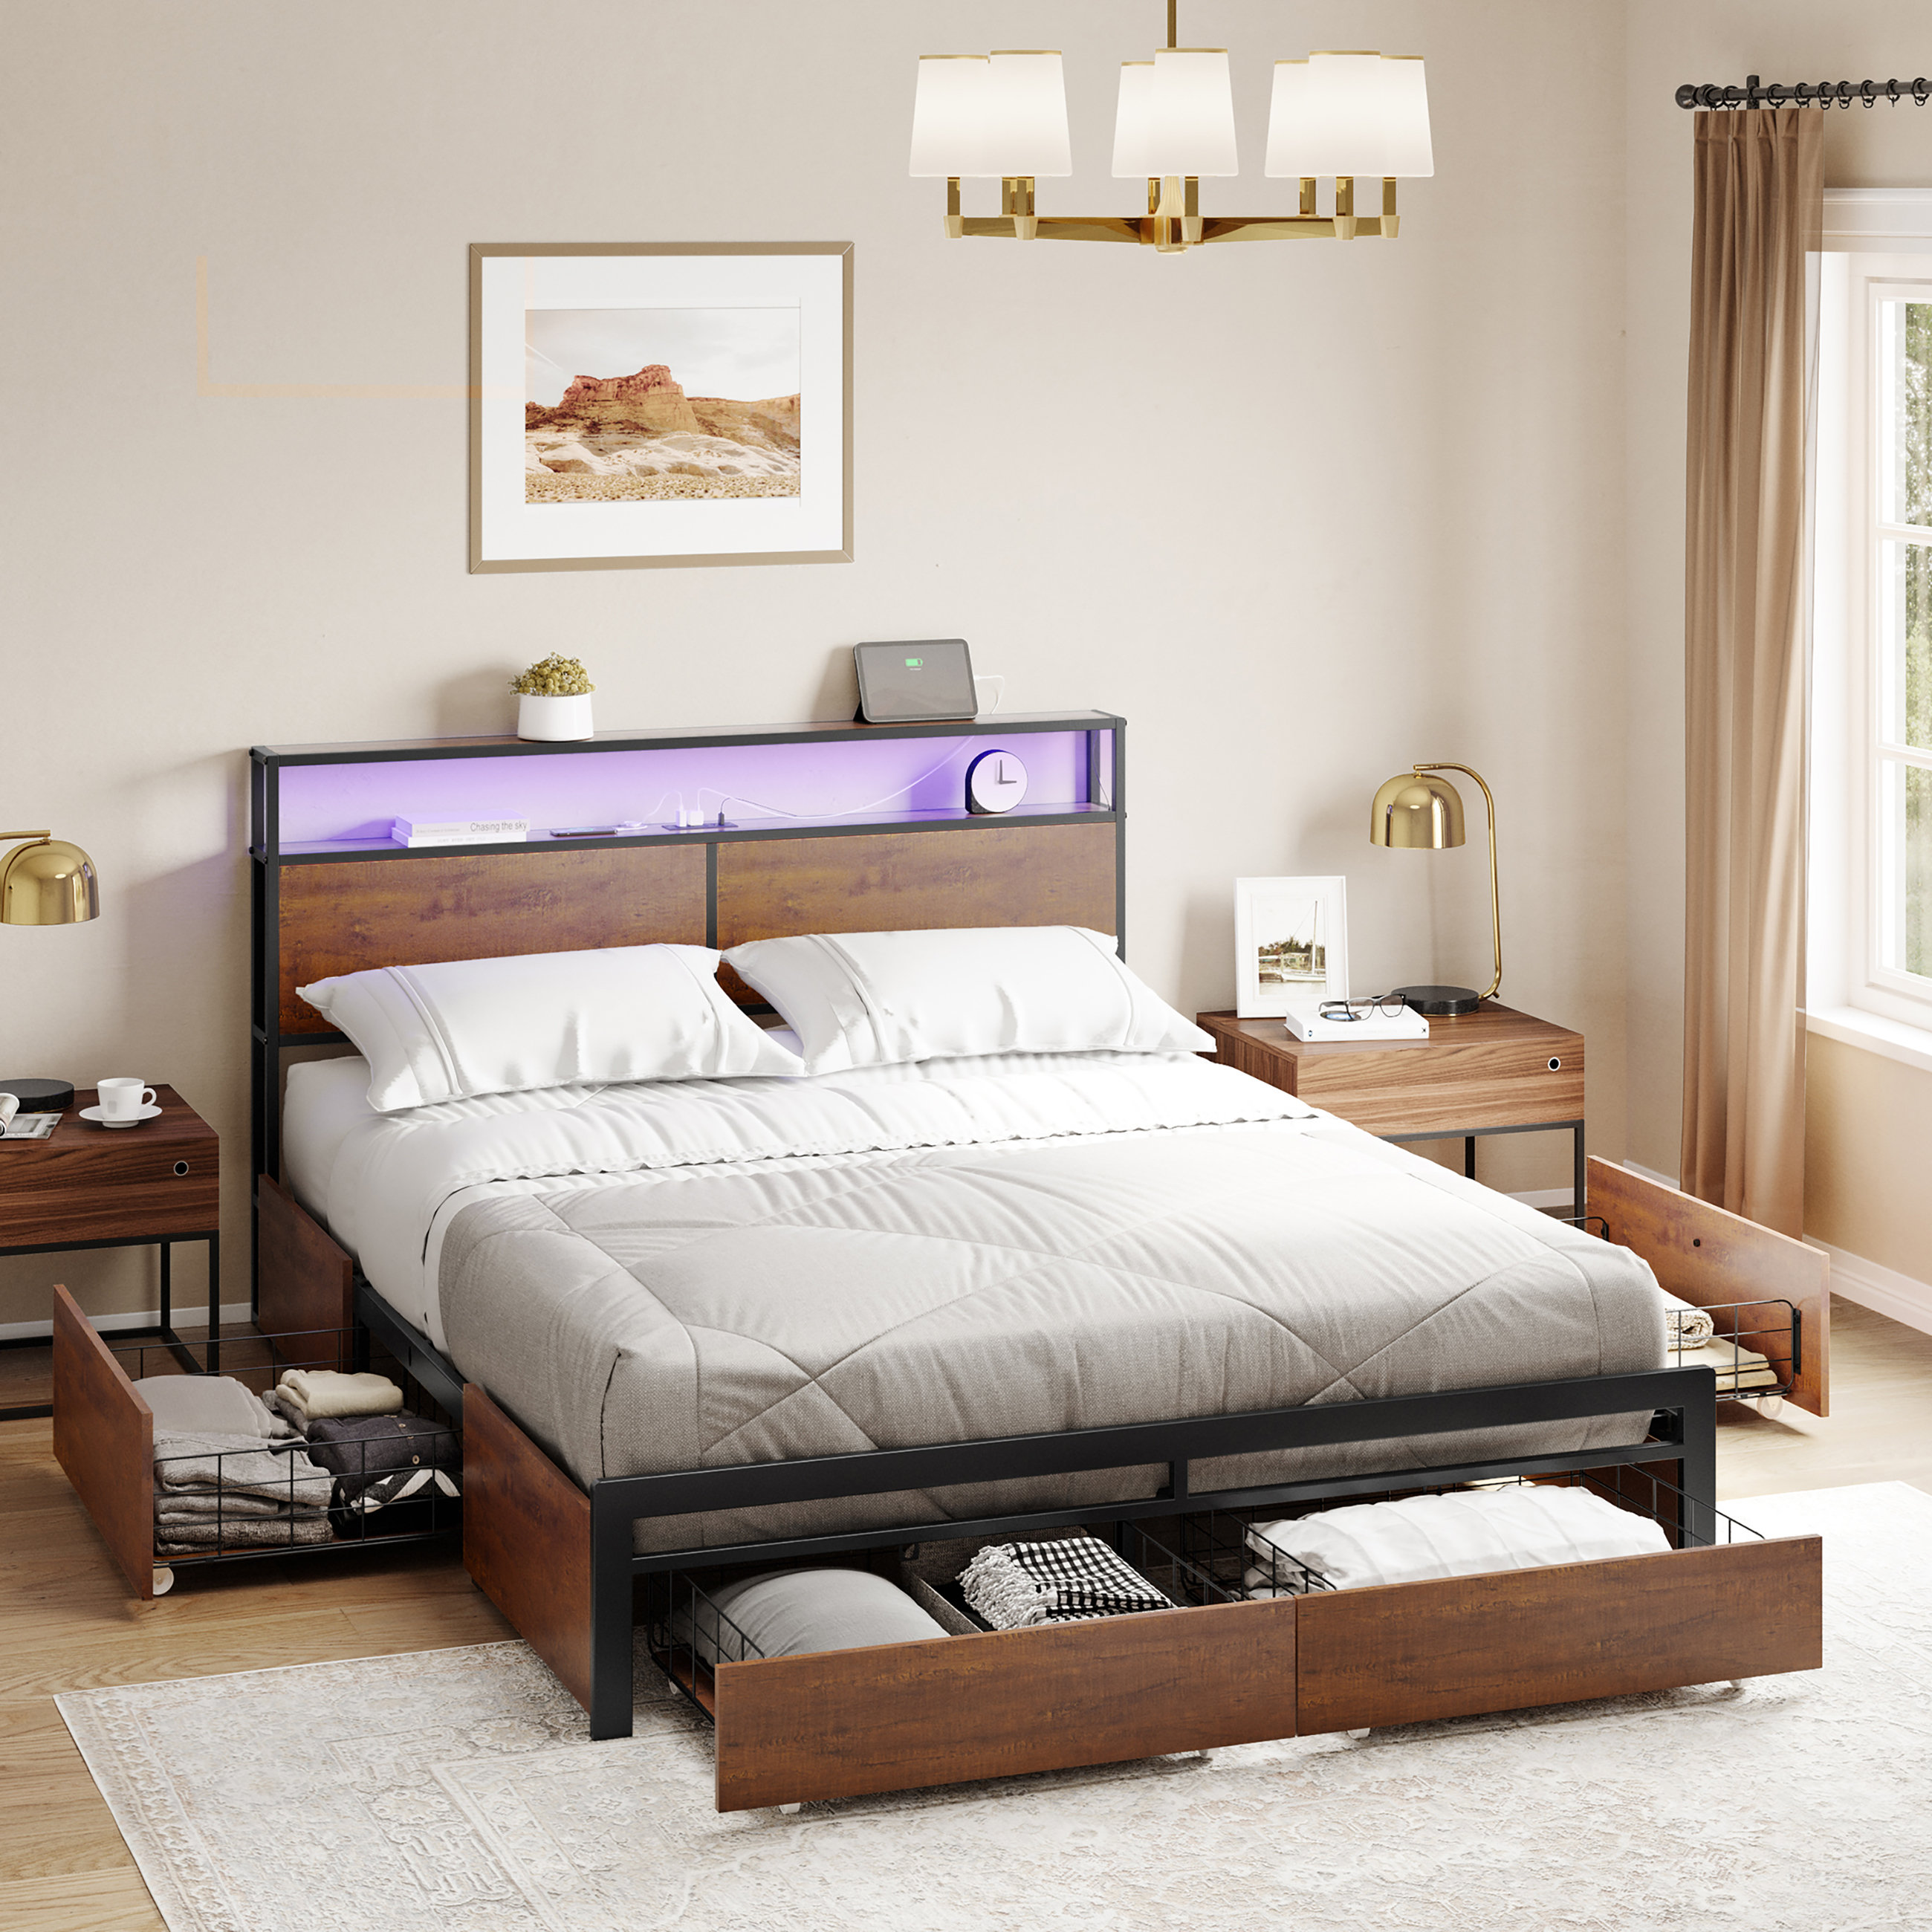 King Bed Frame with 4 Storage Drawers, Platform Bed with Charged